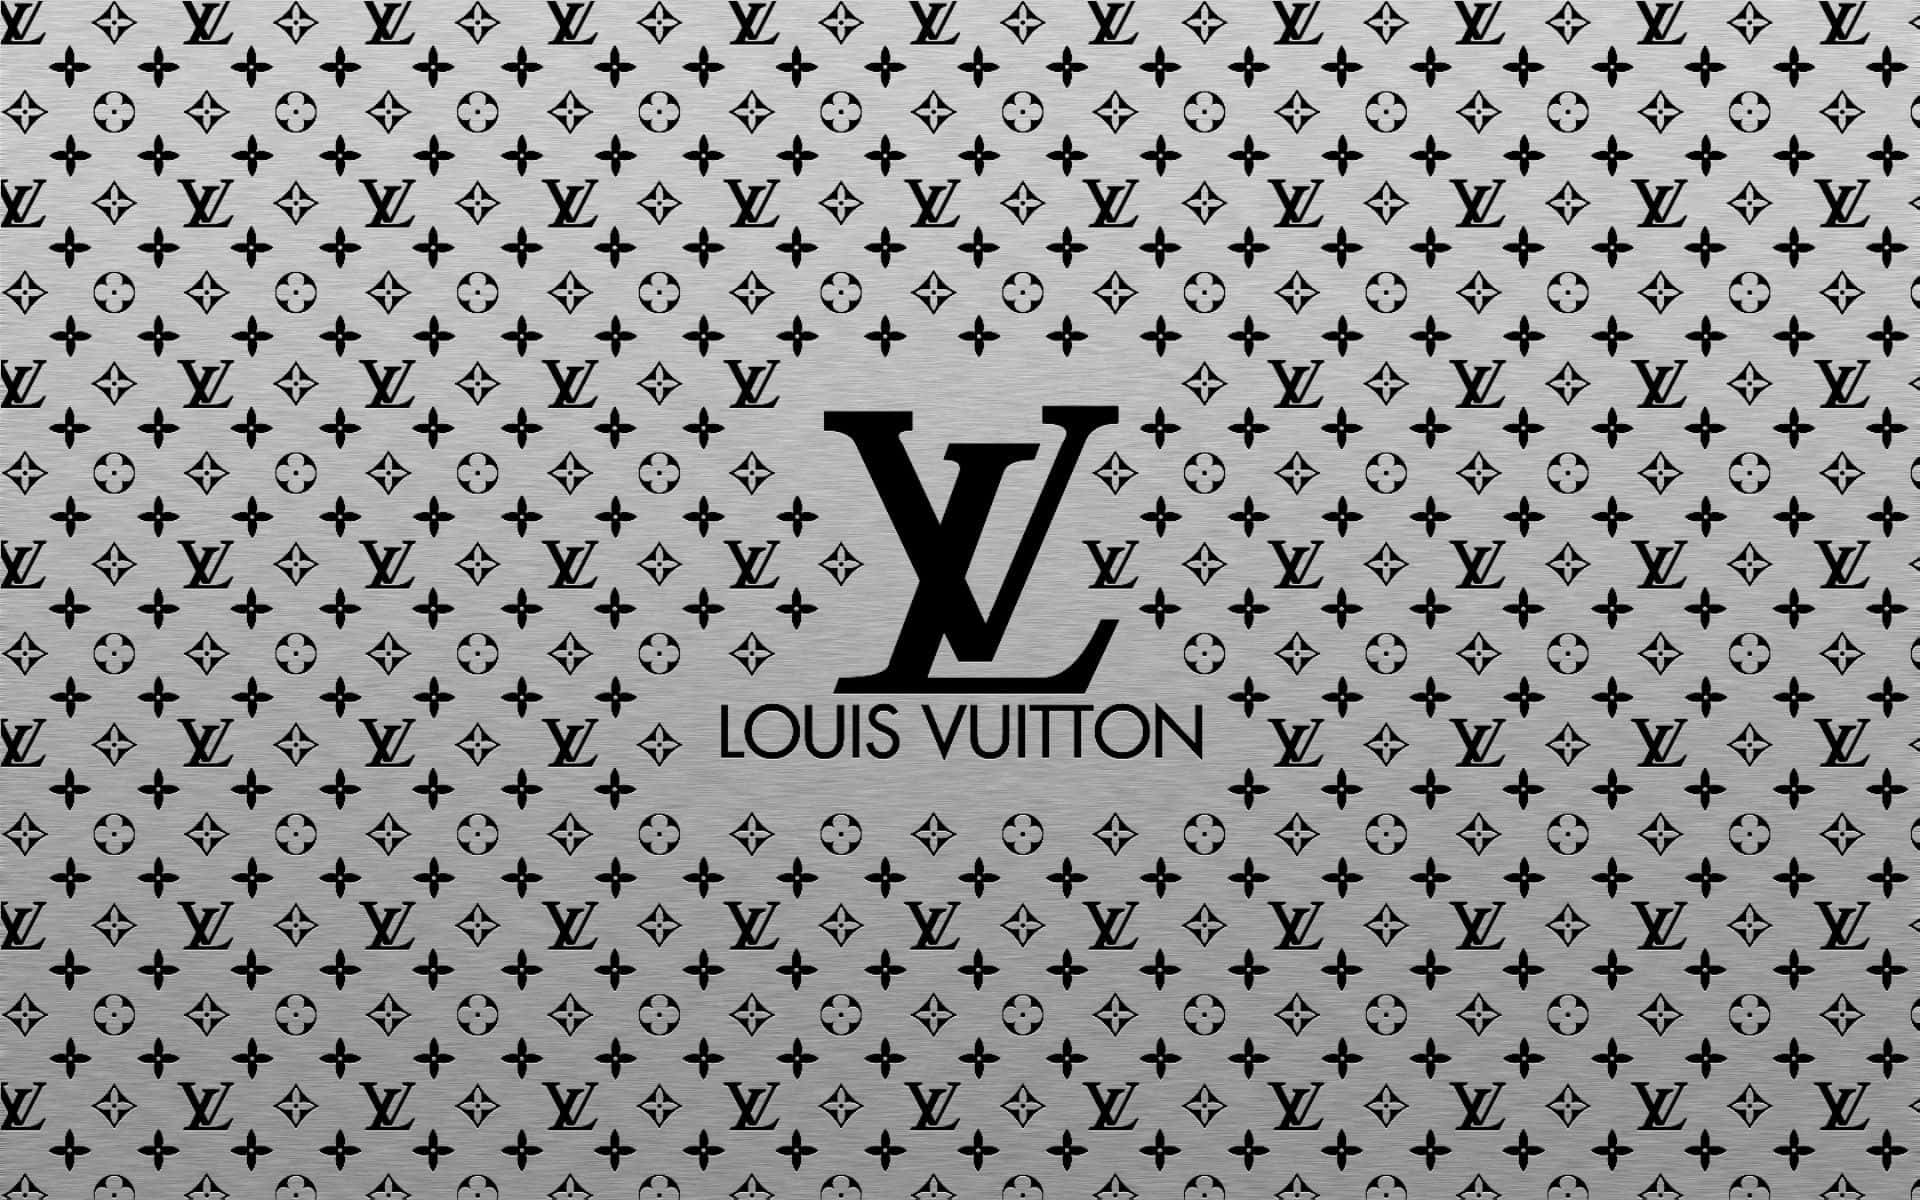 Step Up Your Style Game in Cool Louis Vuitton Wallpaper